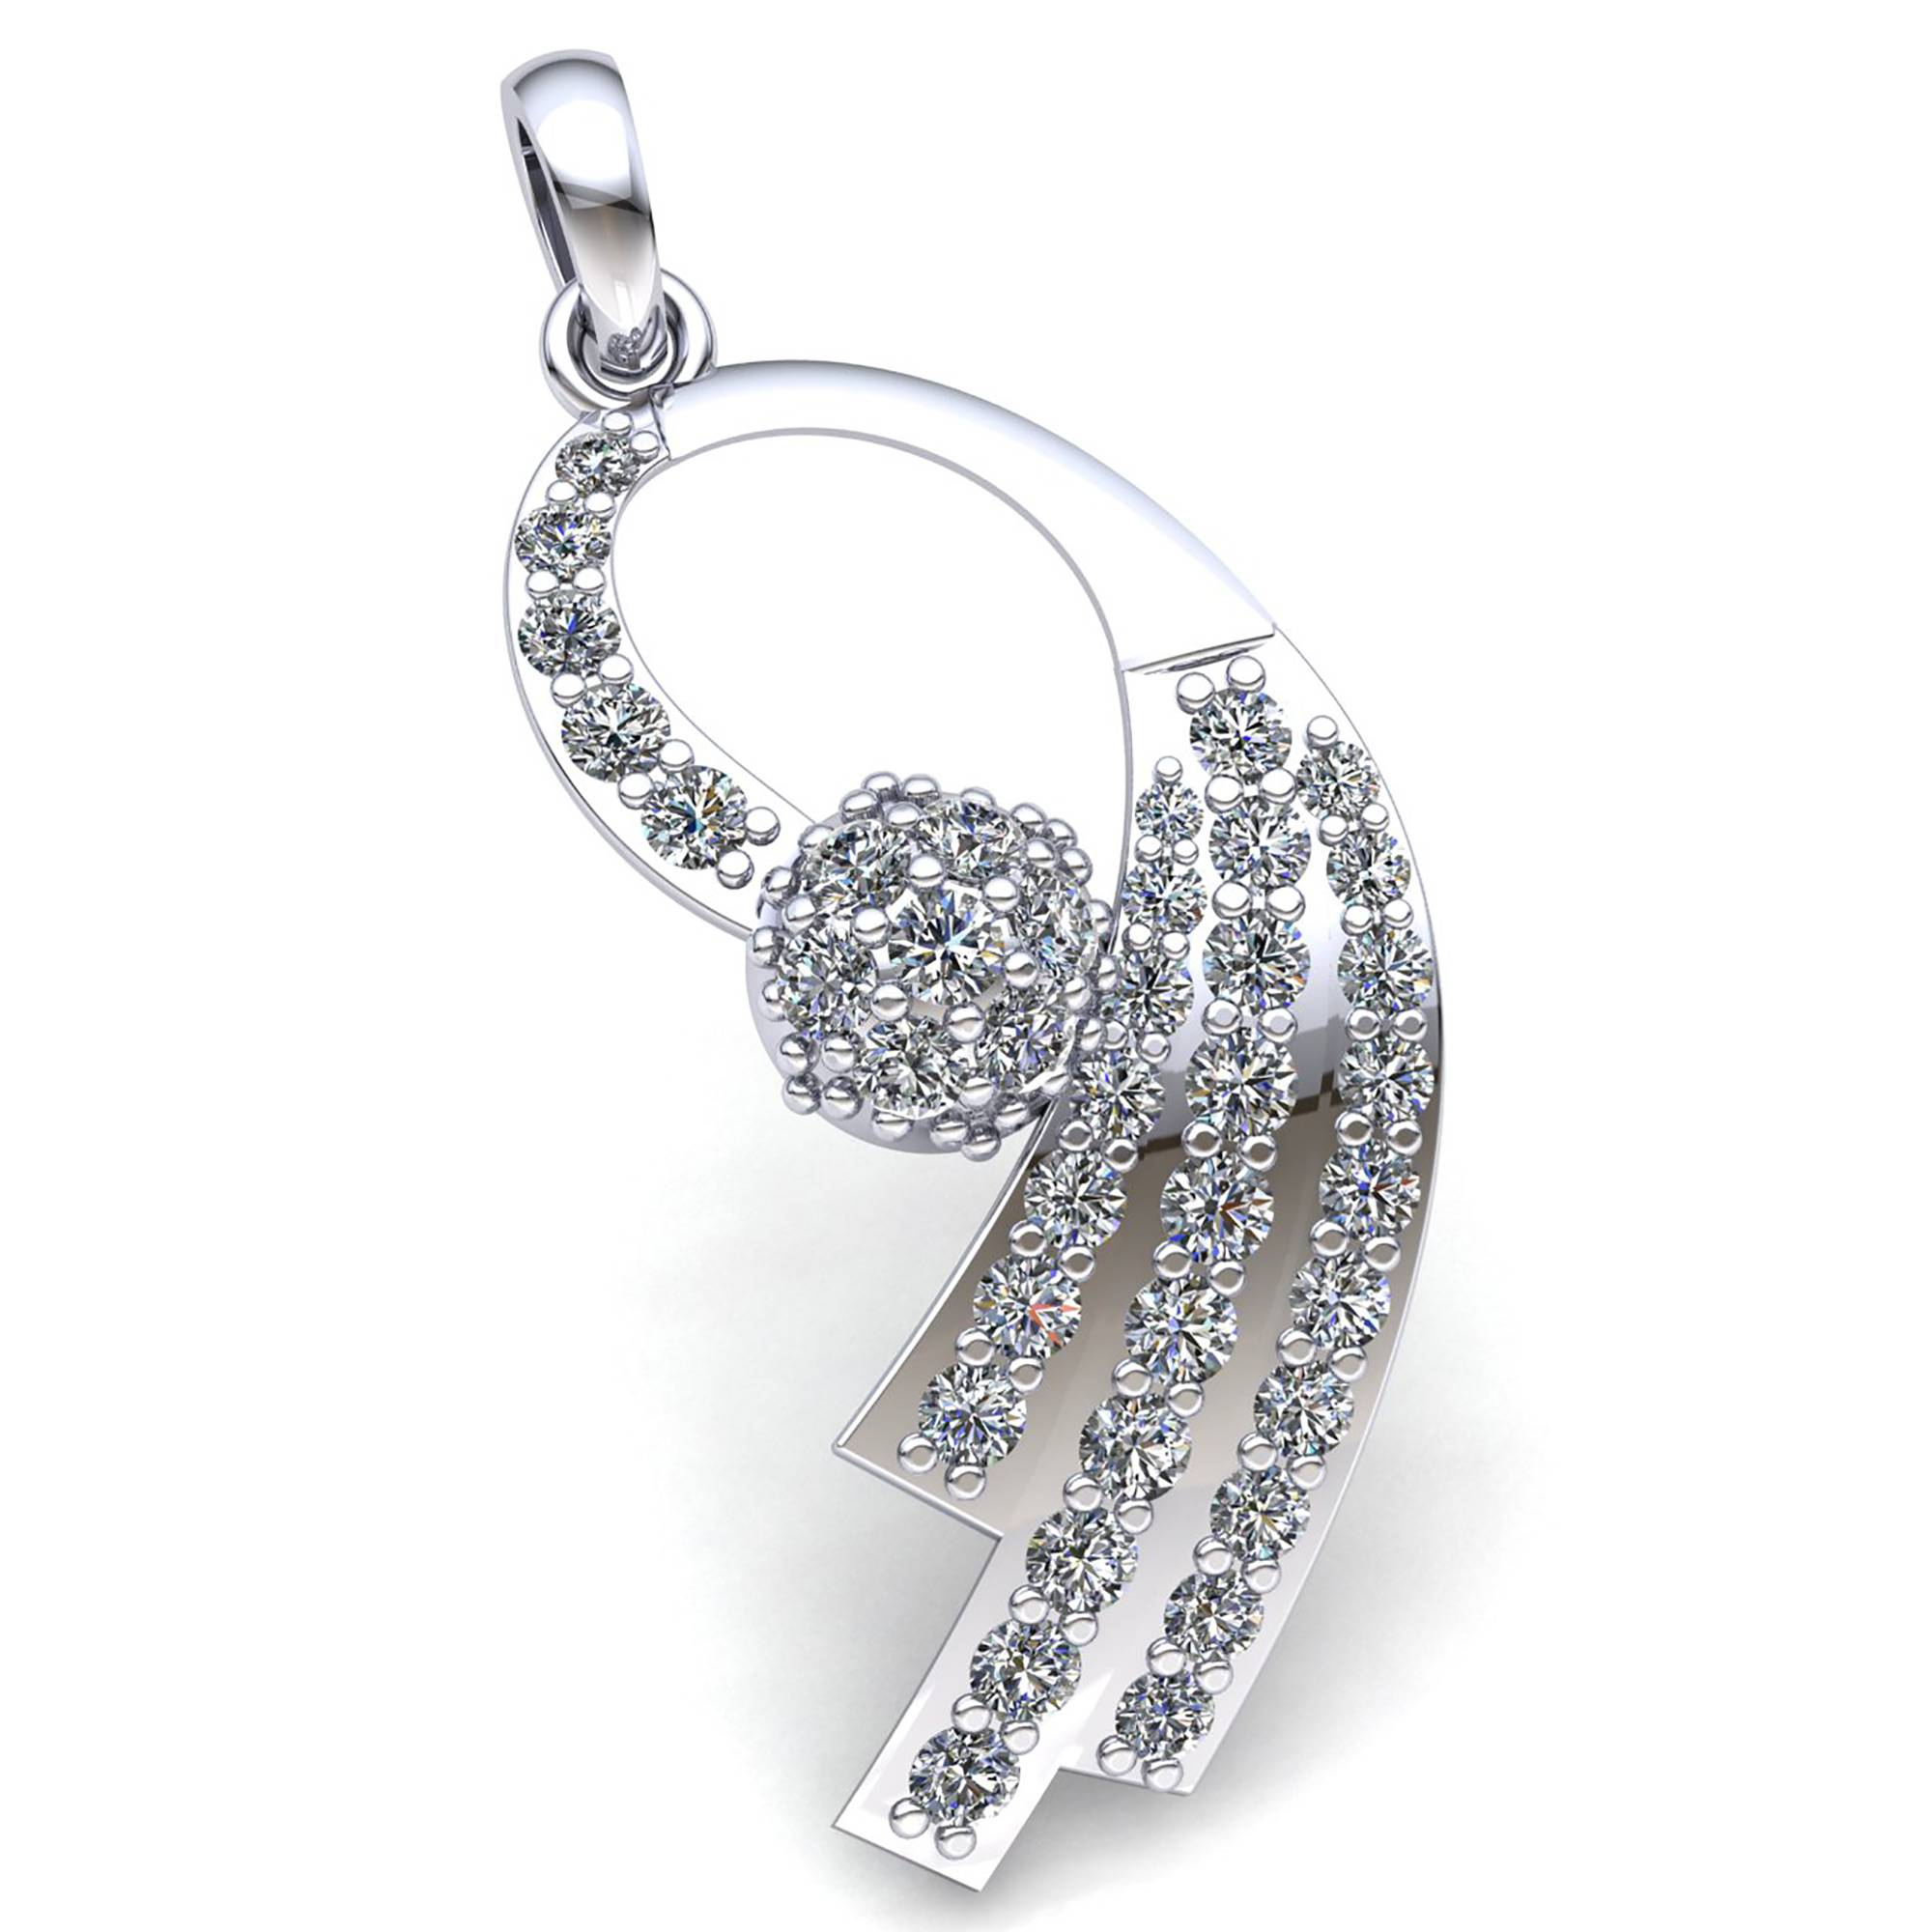 Jewel We Sell 1.5carat Round Cut Diamond Ladies Twisted For Her Fancy Pendant Solid 18K White Gold H SI2